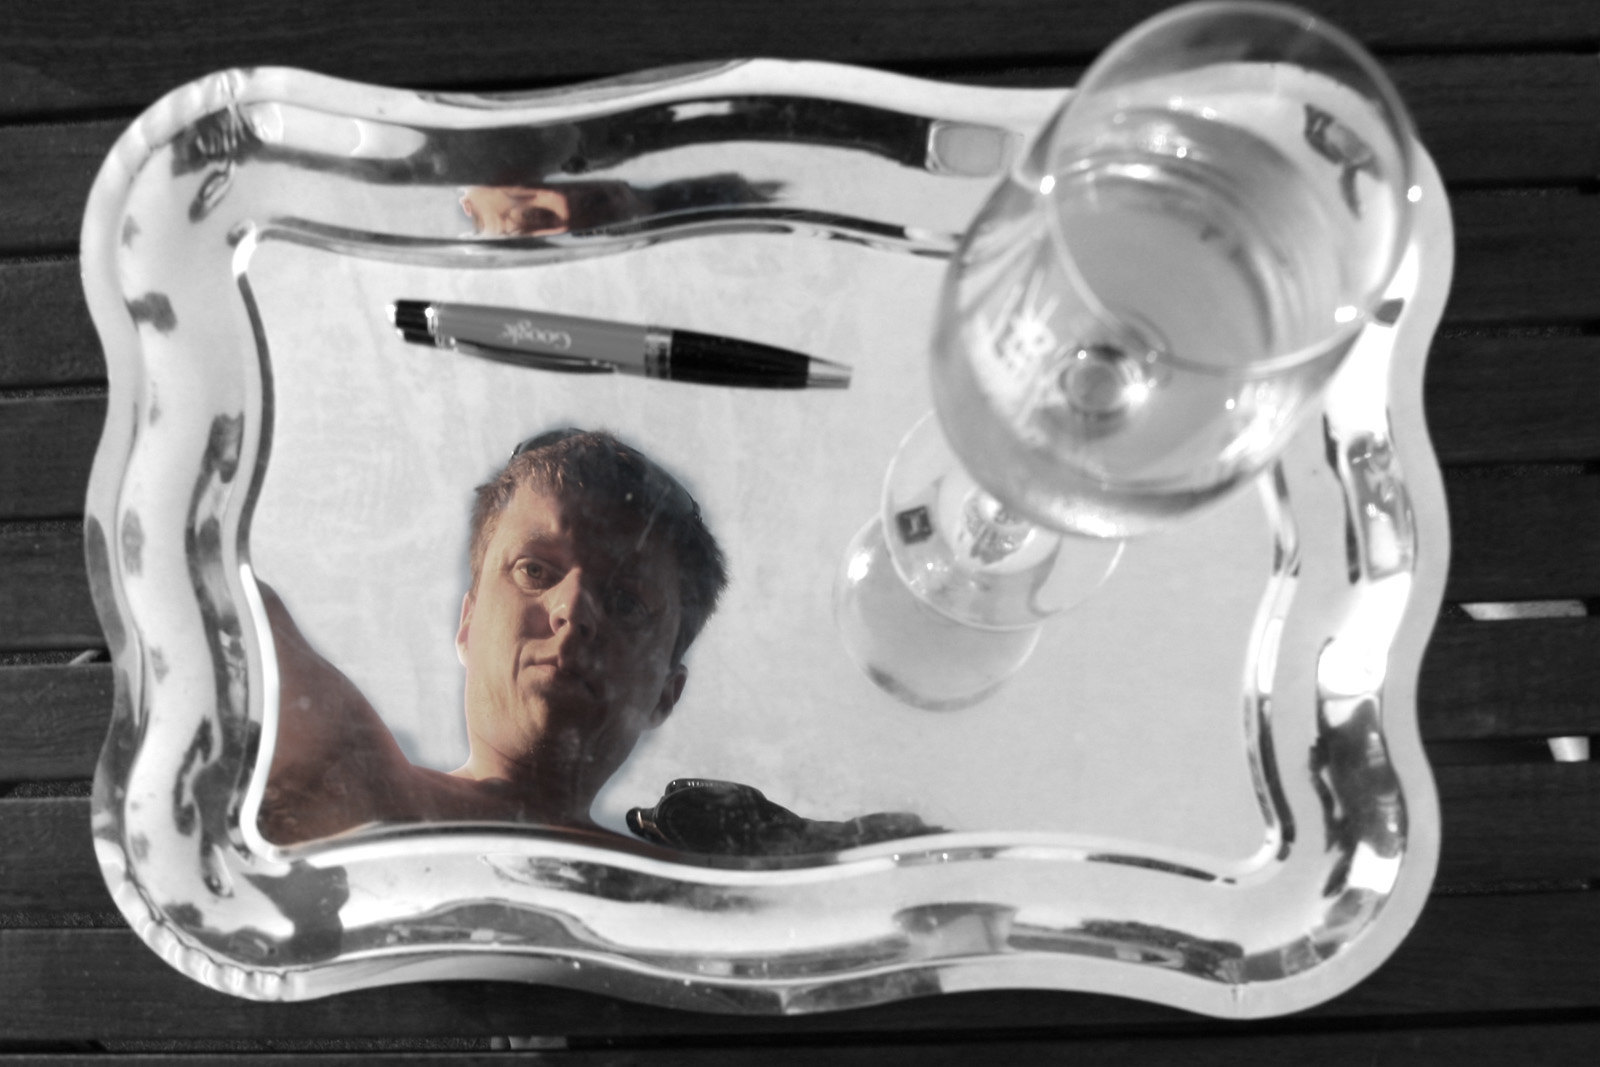 “Mirrored Self Portrait in Serving Tray” © Jo Christian Oterhals; Creative Commons license